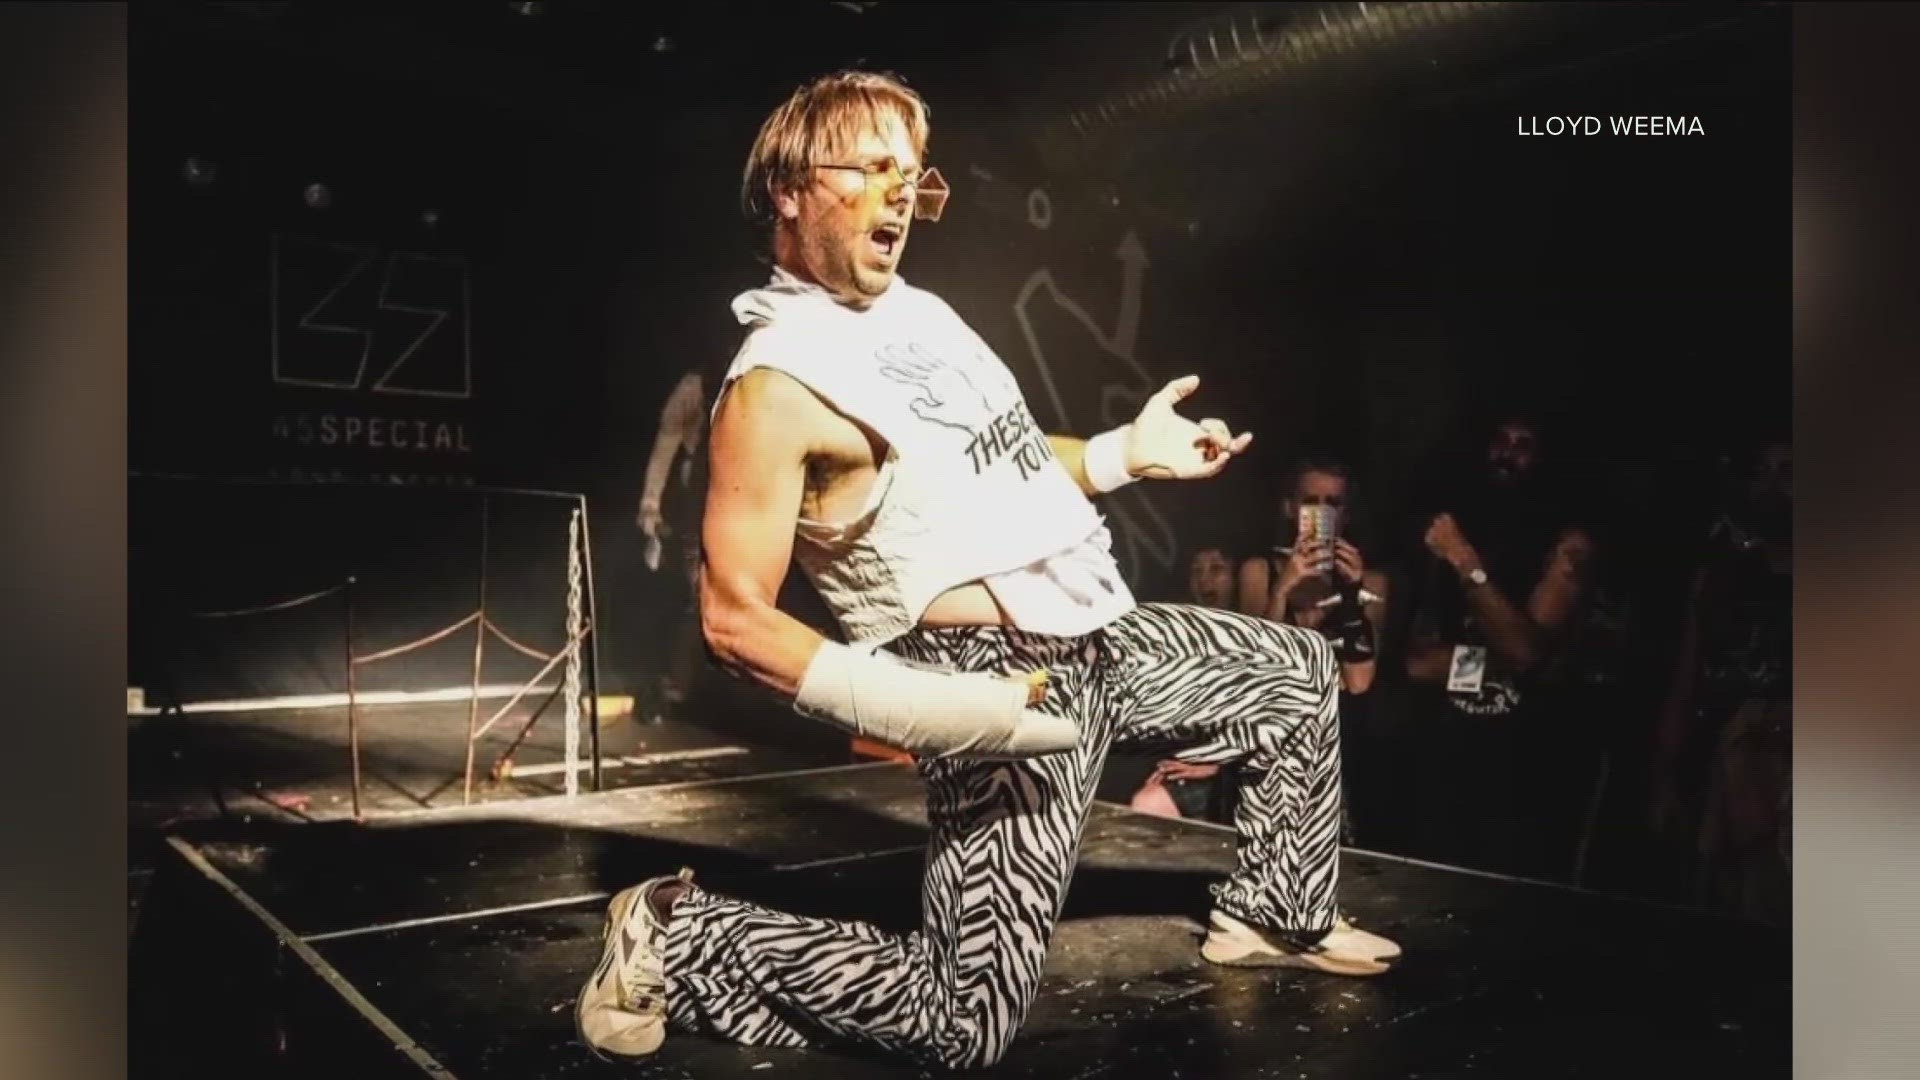 The 2023 US Air Guitar Championship tournament is set to begin on Saturday at The SHREDDER in downtown Boise. The event benefits the Leukemia & Lymphoma Society.